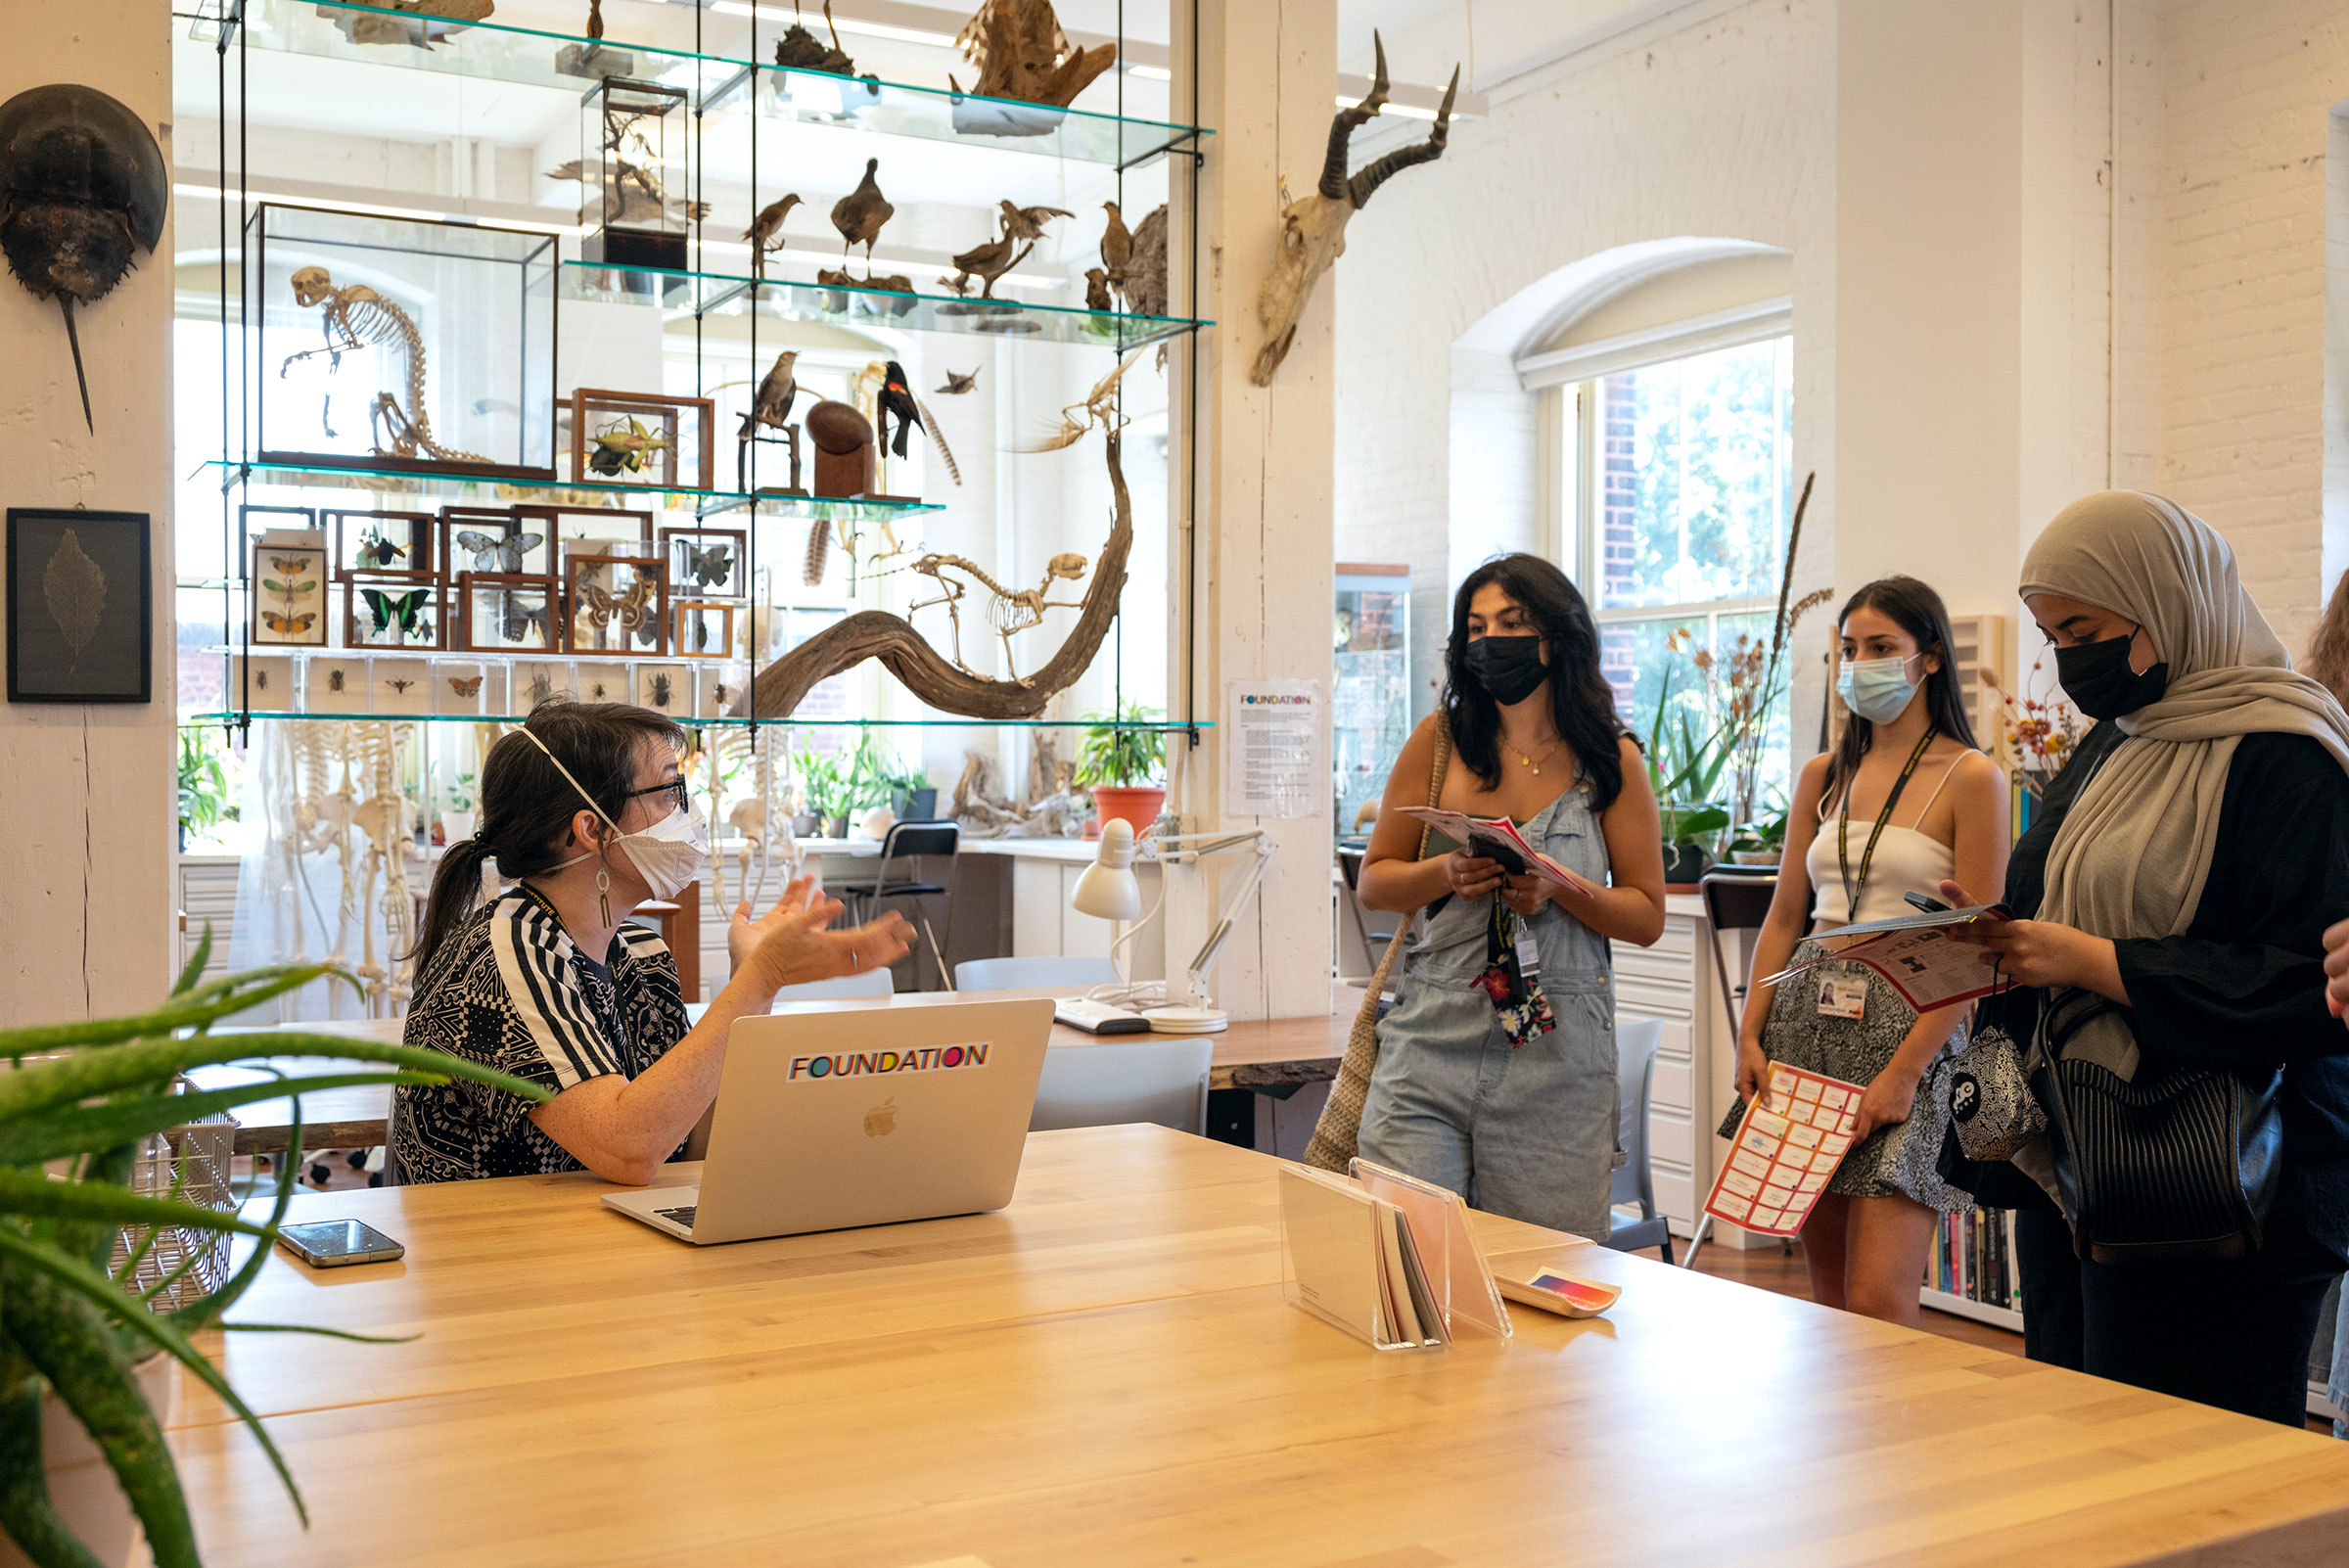 Three students listen to a fourth student explain the Foundations Lab.  The space is a brightly lit room with sketch and figure models arranged on glass shelves